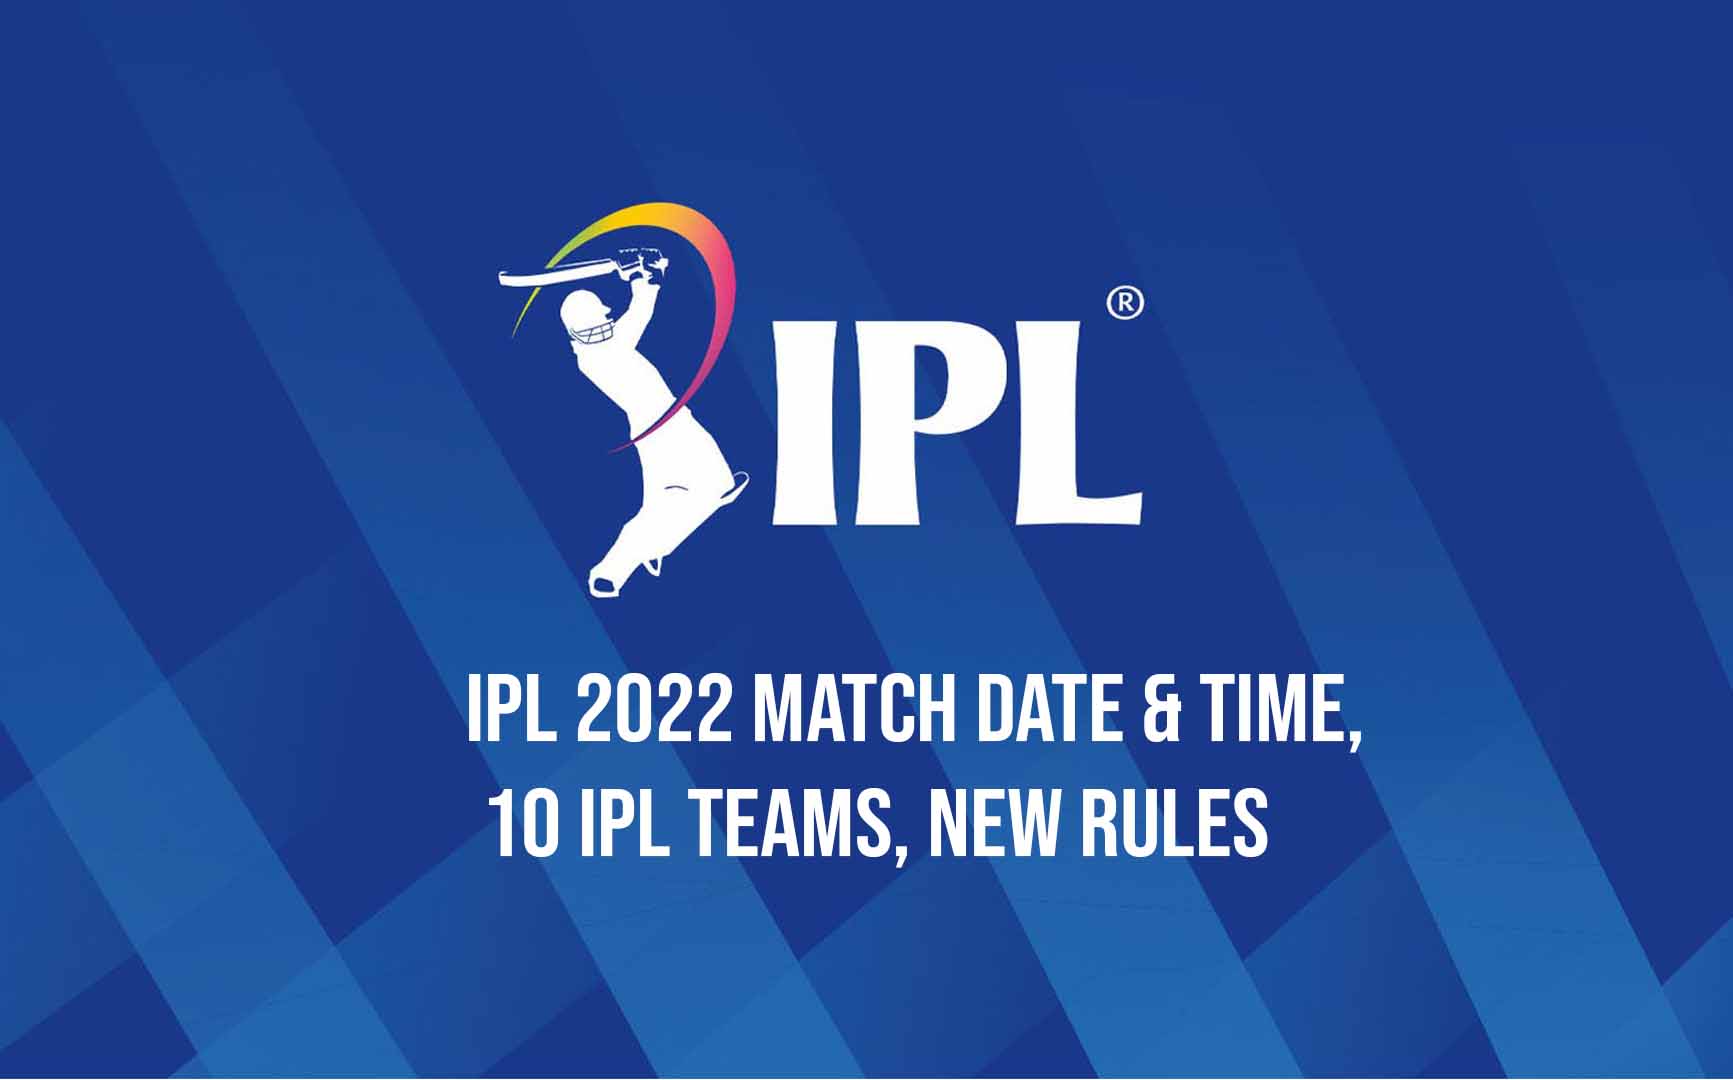 IPL 2022 Match Date & Time, 10 IPL Teams, New Rules